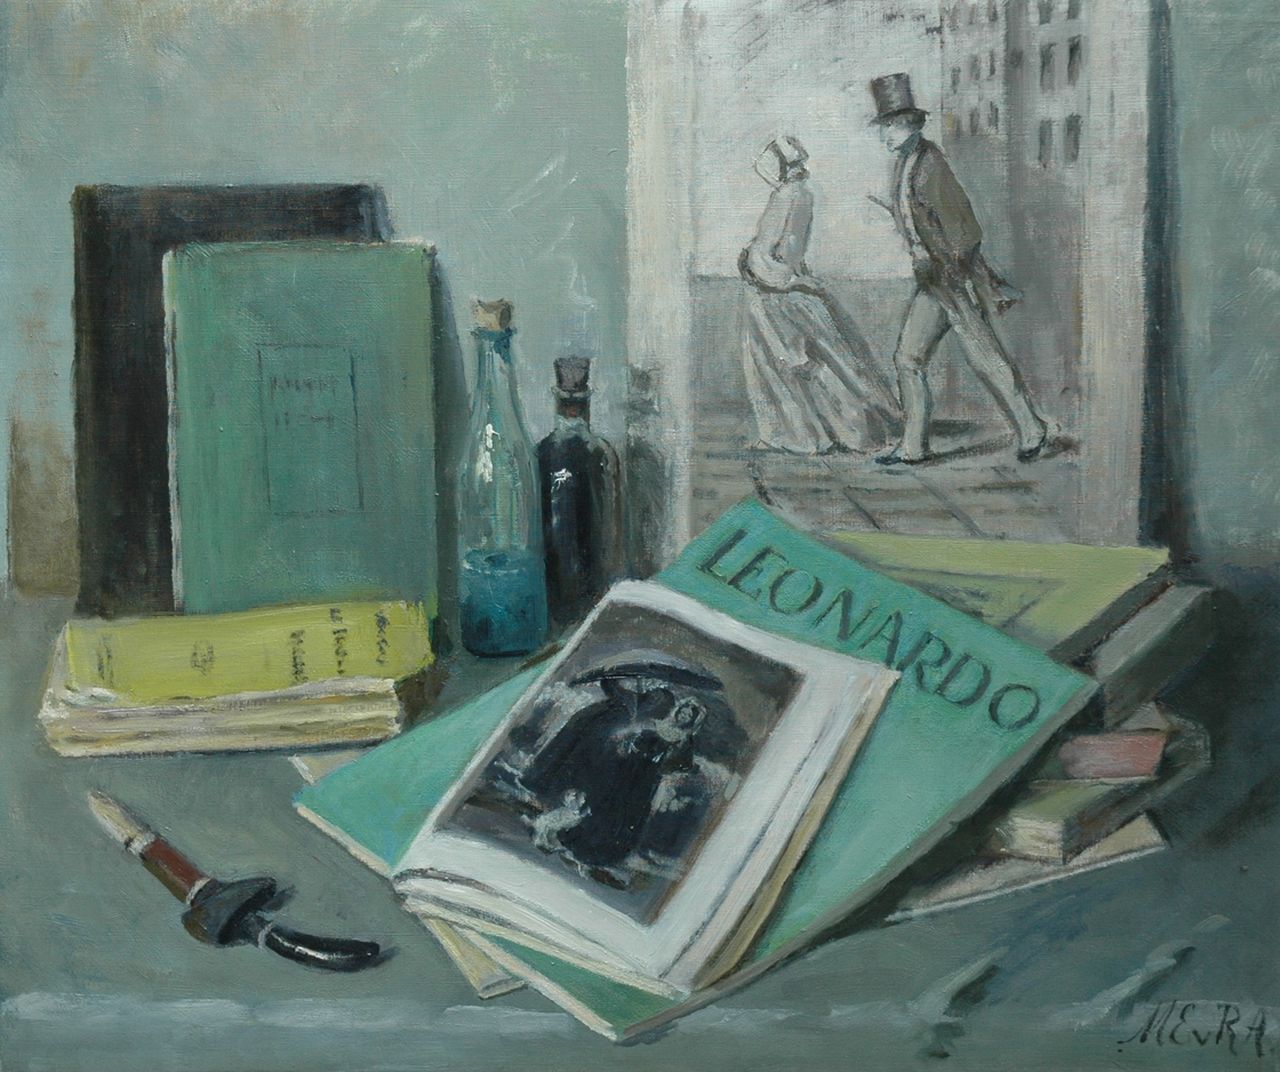 Regteren Altena M.E. van | 'Marie' Engelina van Regteren Altena | Paintings offered for sale | Still life with books, oil on canvas 54.0 x 65.0 cm, signed l.r. with initials and painted 1949